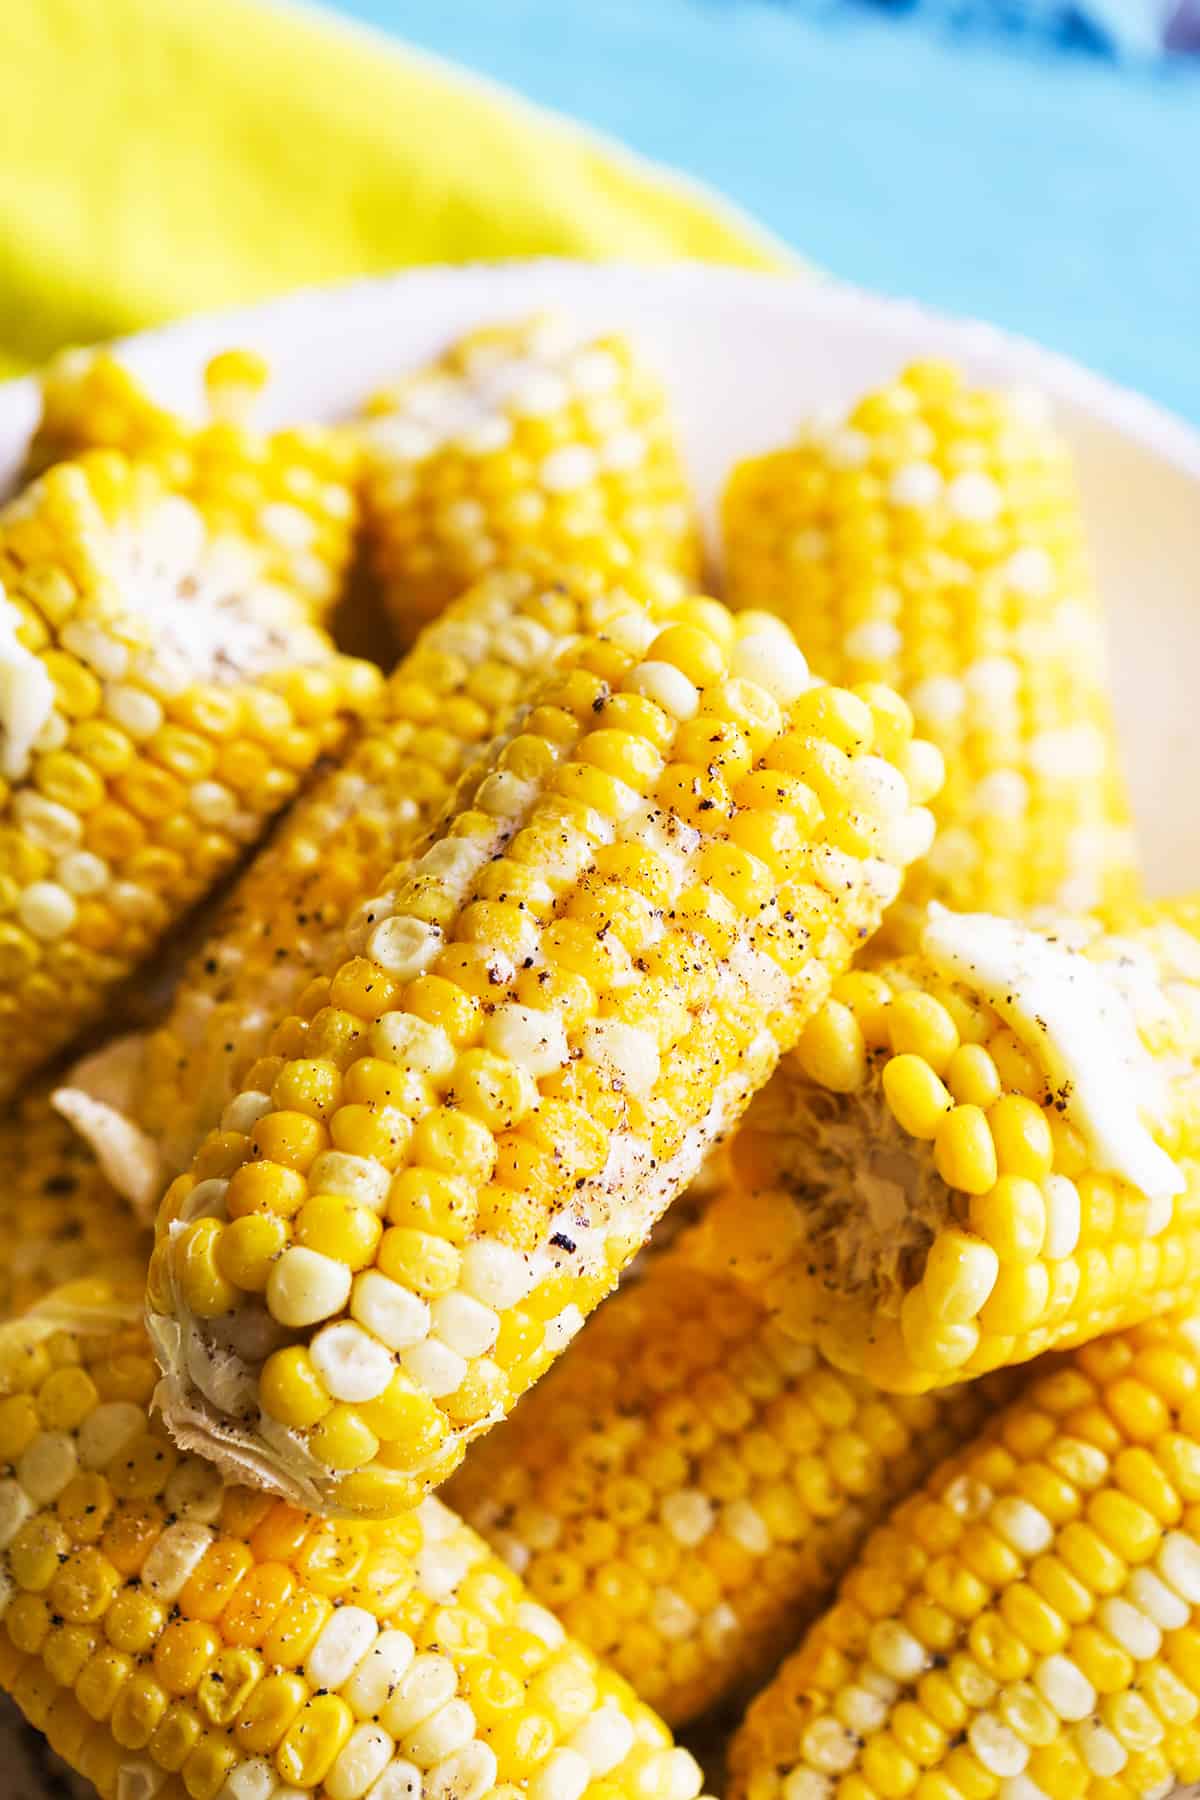 A serving plate filled with cooked corn on the cob sprinkled with pepper.